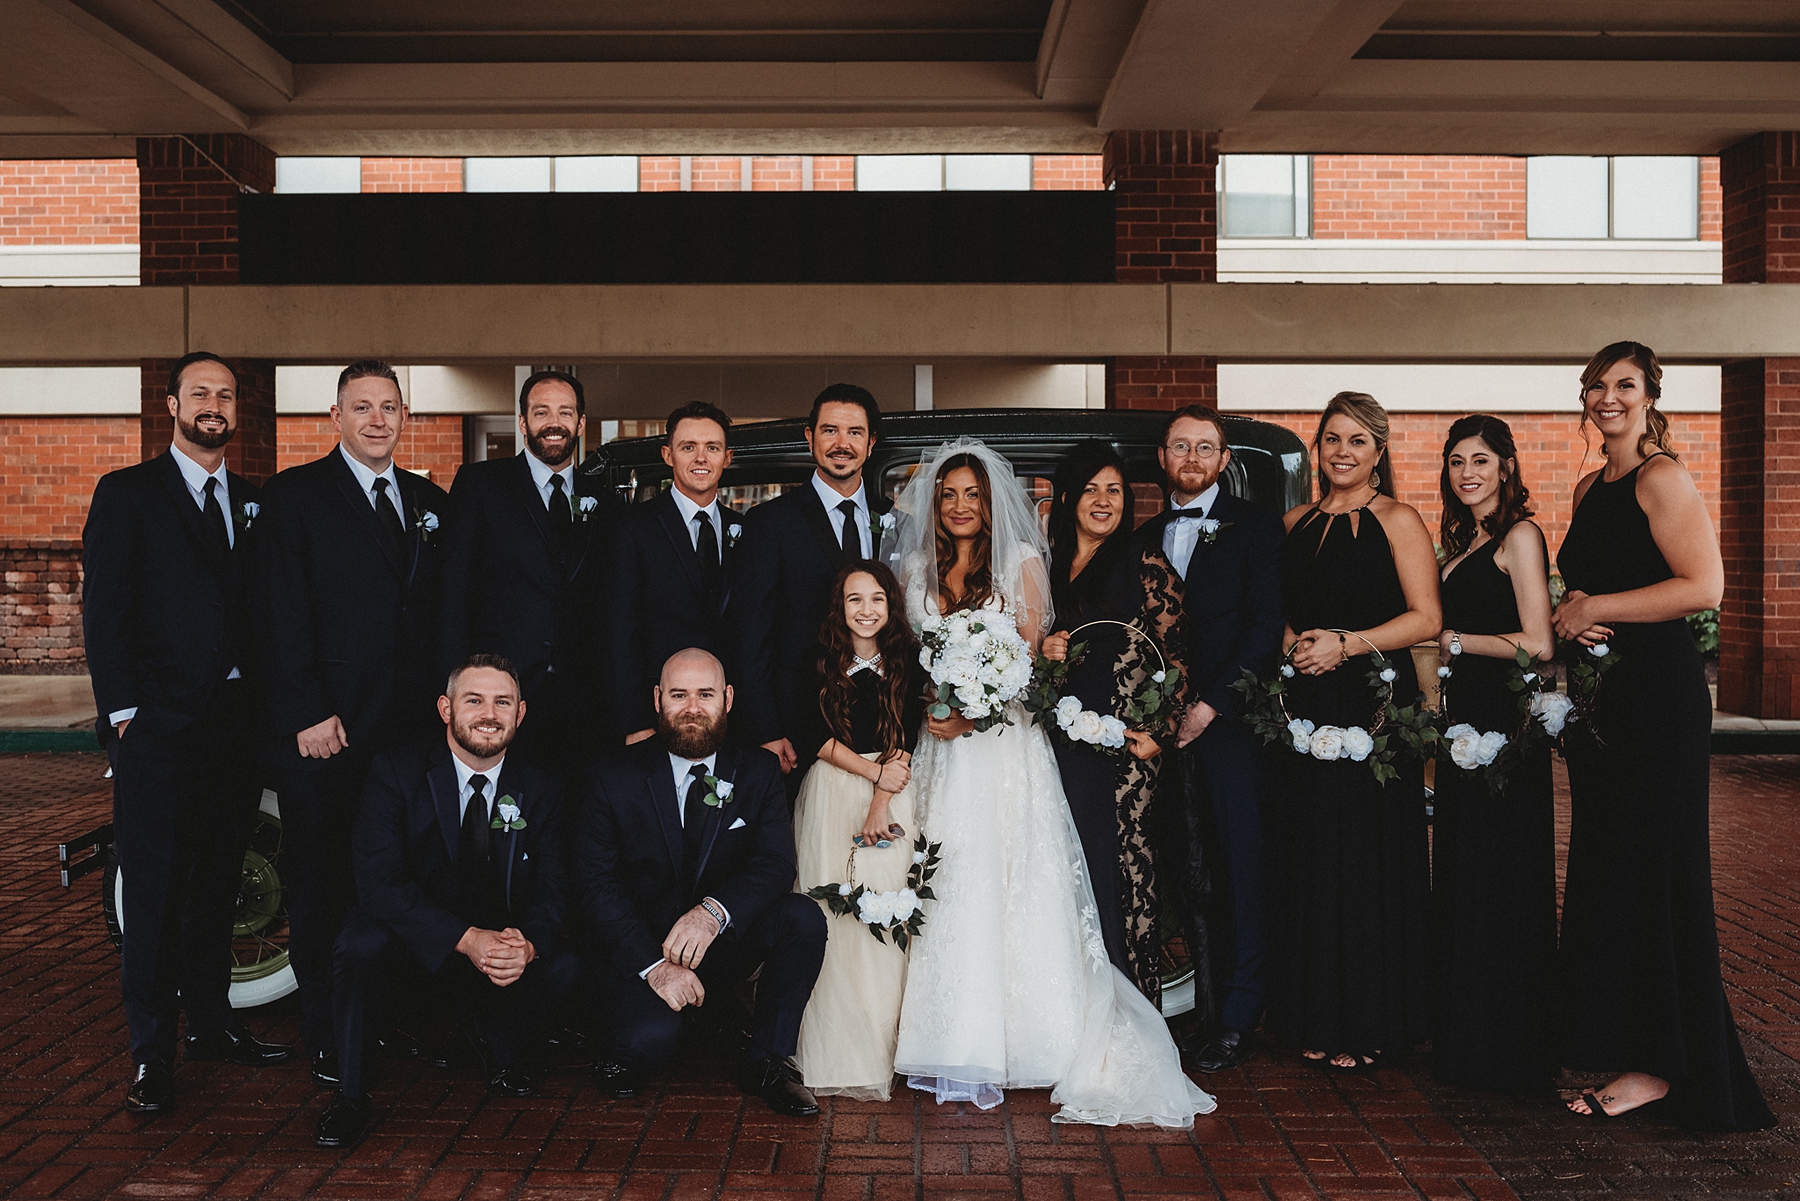 Bridal Party at Sheraton Suites Wedding in Akron, Cuyahoga Falls